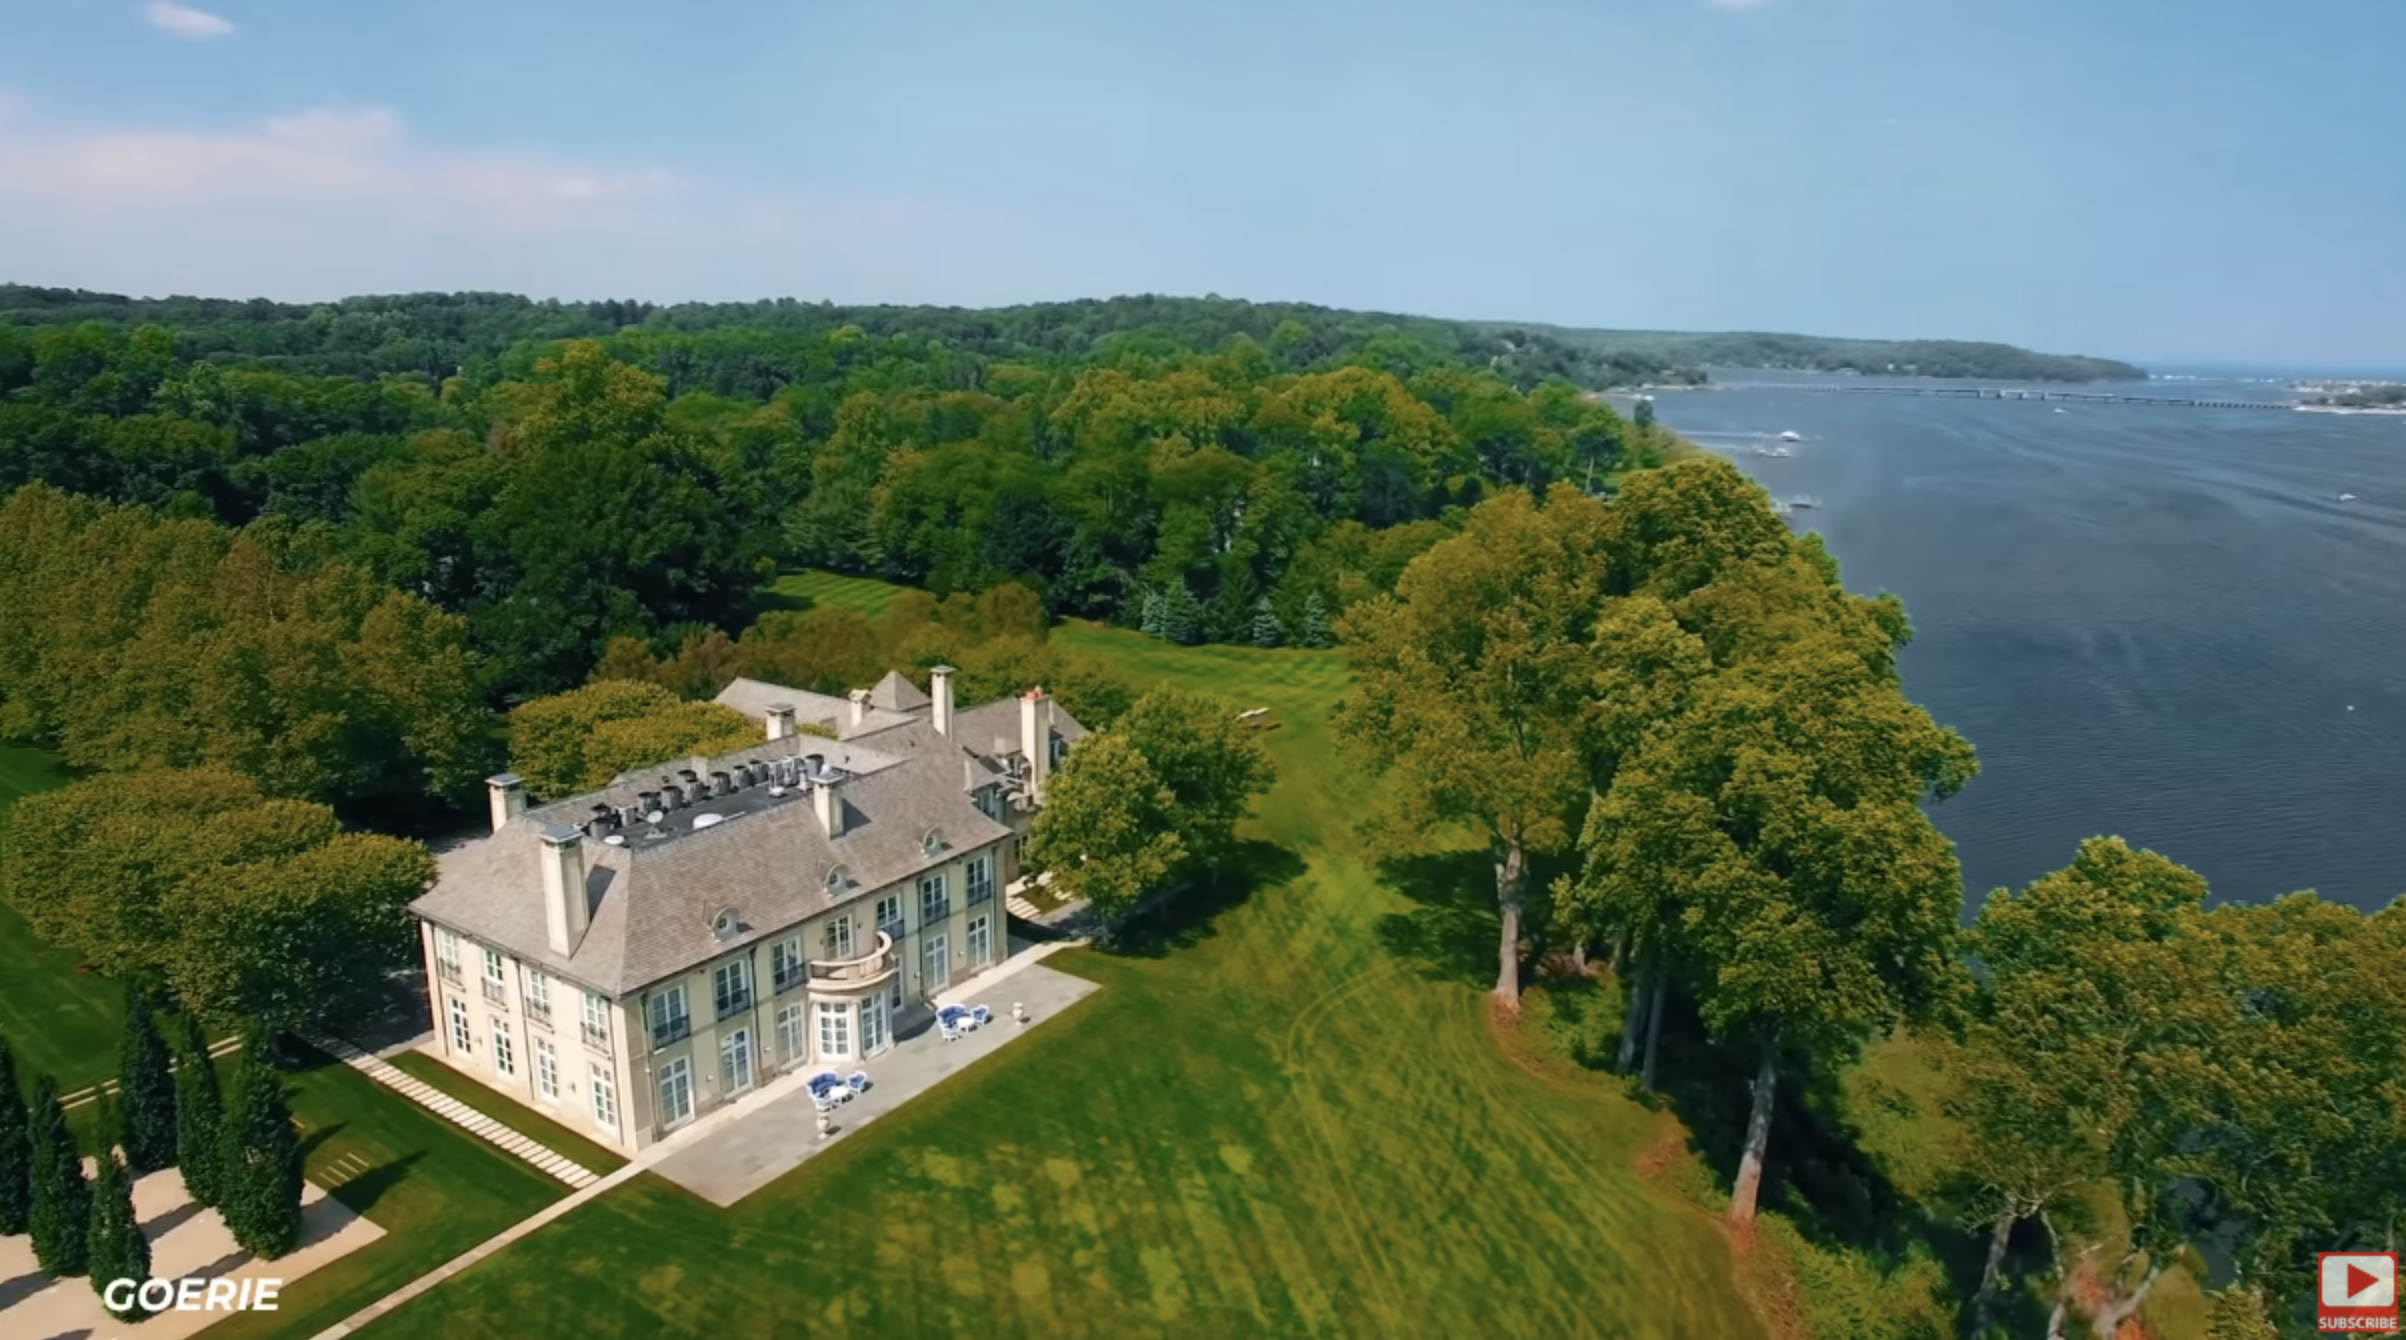 A distant shot showing Jon Bon Jovi's French-inspired chateau in New Jersey | Source: youtube.com/TheRichest